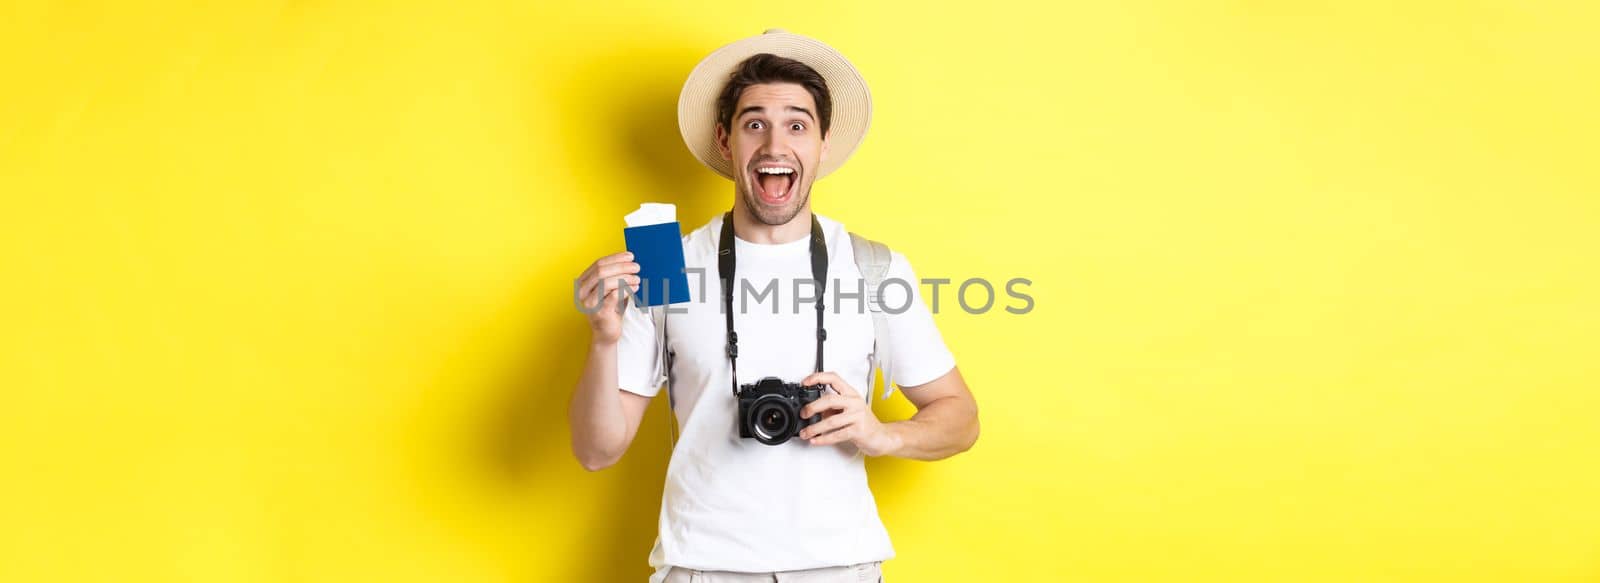 Travelling, vacation and tourism concept. Excoted tpirost showing passport with tickets, holding camera and wearing straw hat, standing over yellow background.